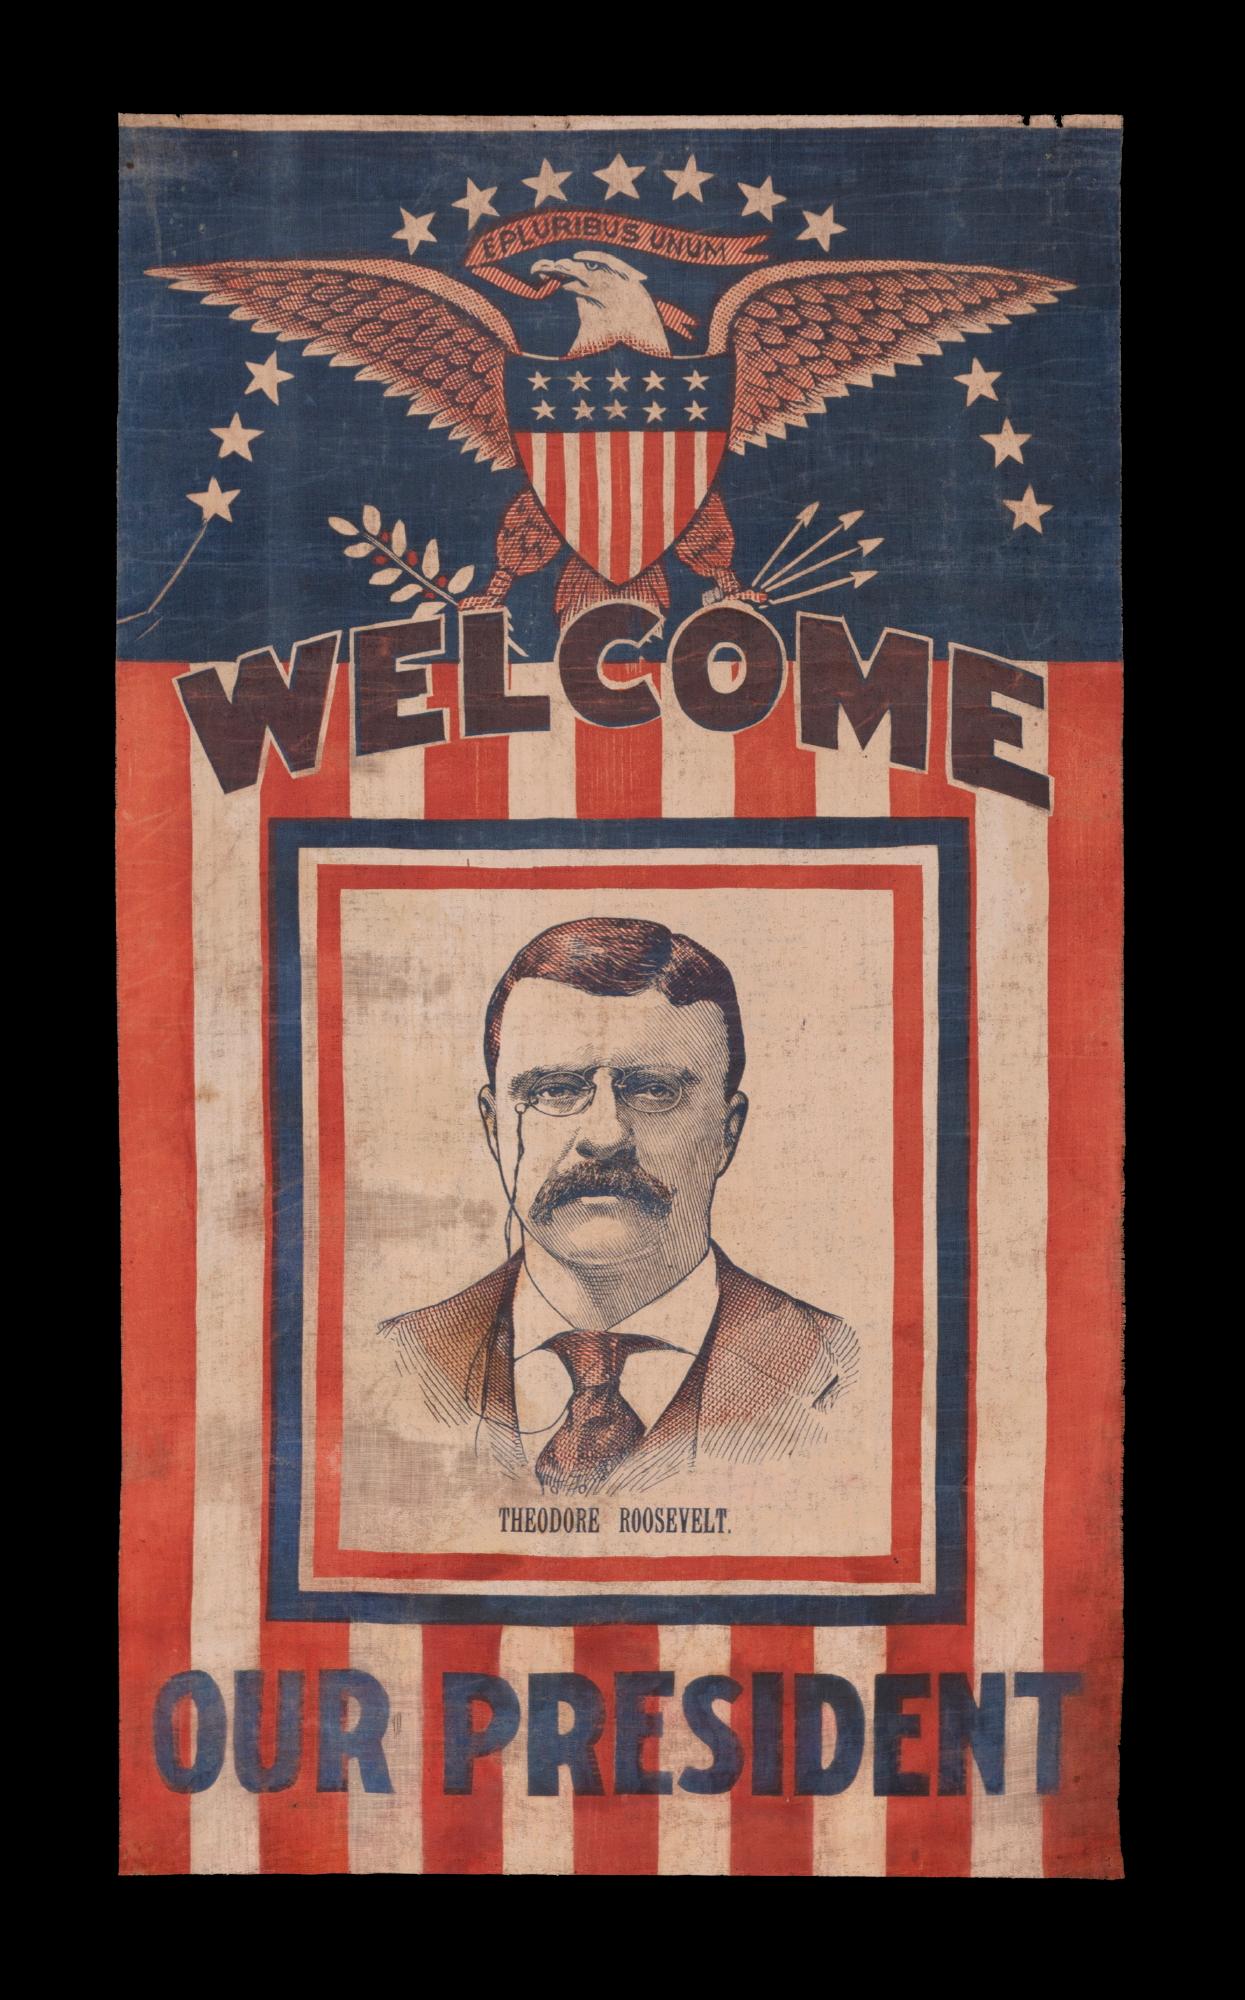 Striking Teddy Roosevelt Parade Flag-Style Banner with Large Eagle & “welcome Our President” Text, Made Between 1901 And 1908, When He was President of the United States, or in 1912 When He Ran Again on the Progressive Party (Bull Moose)